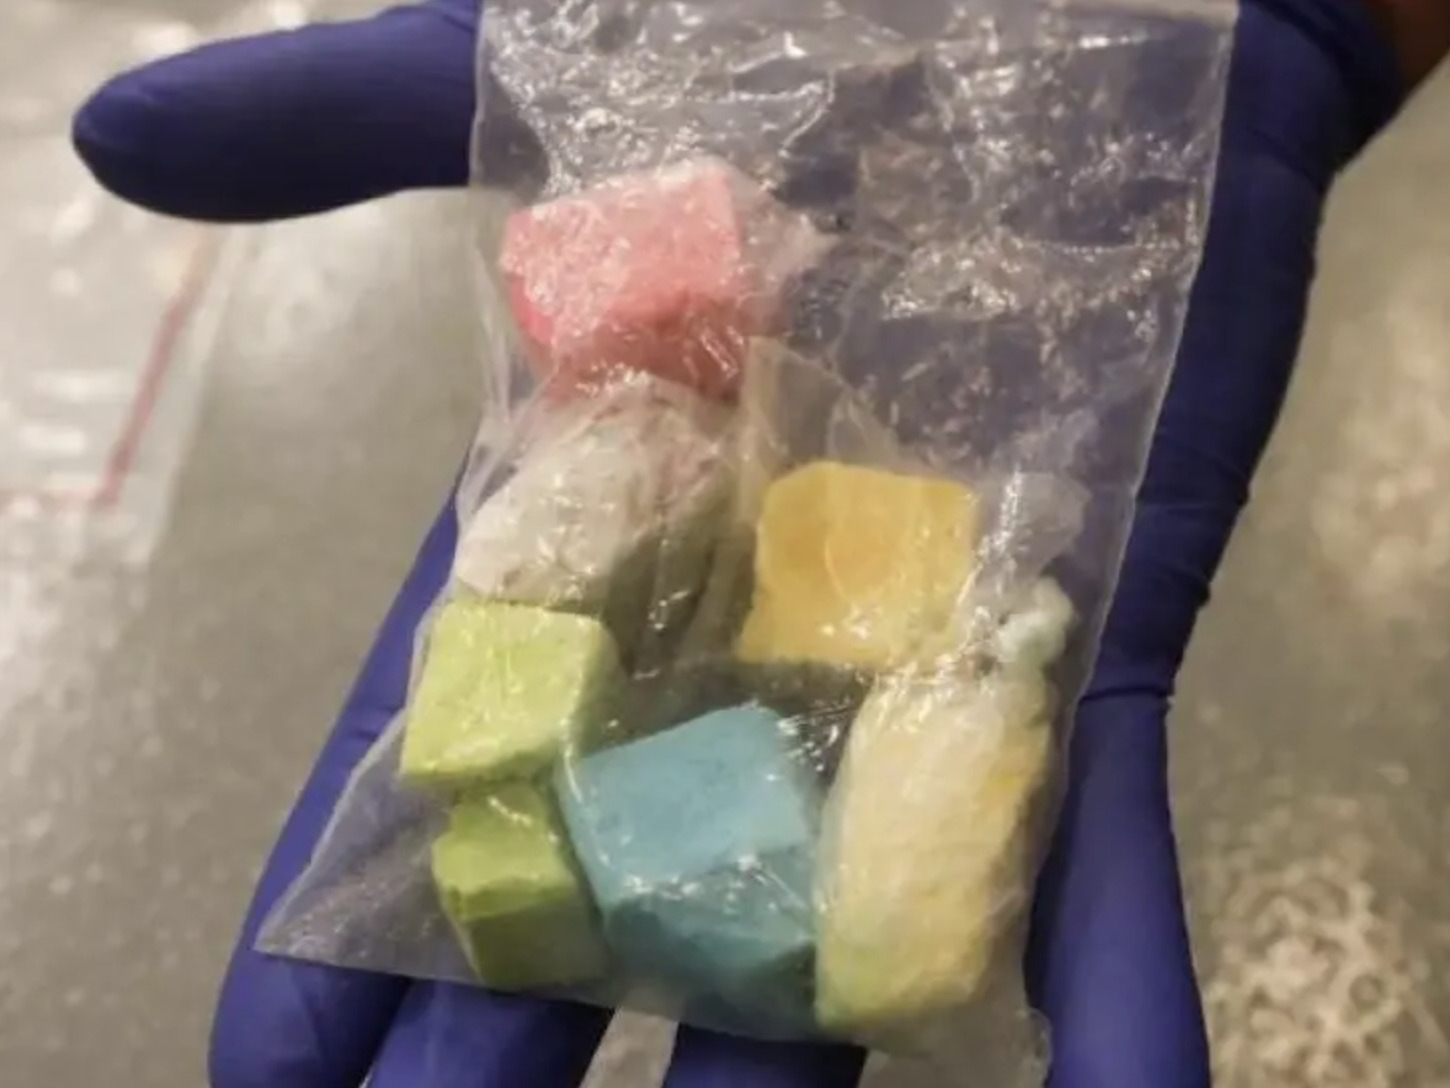 A photo of chunks of rainbow fentanyl in a plastic baggie on a gloved hand.